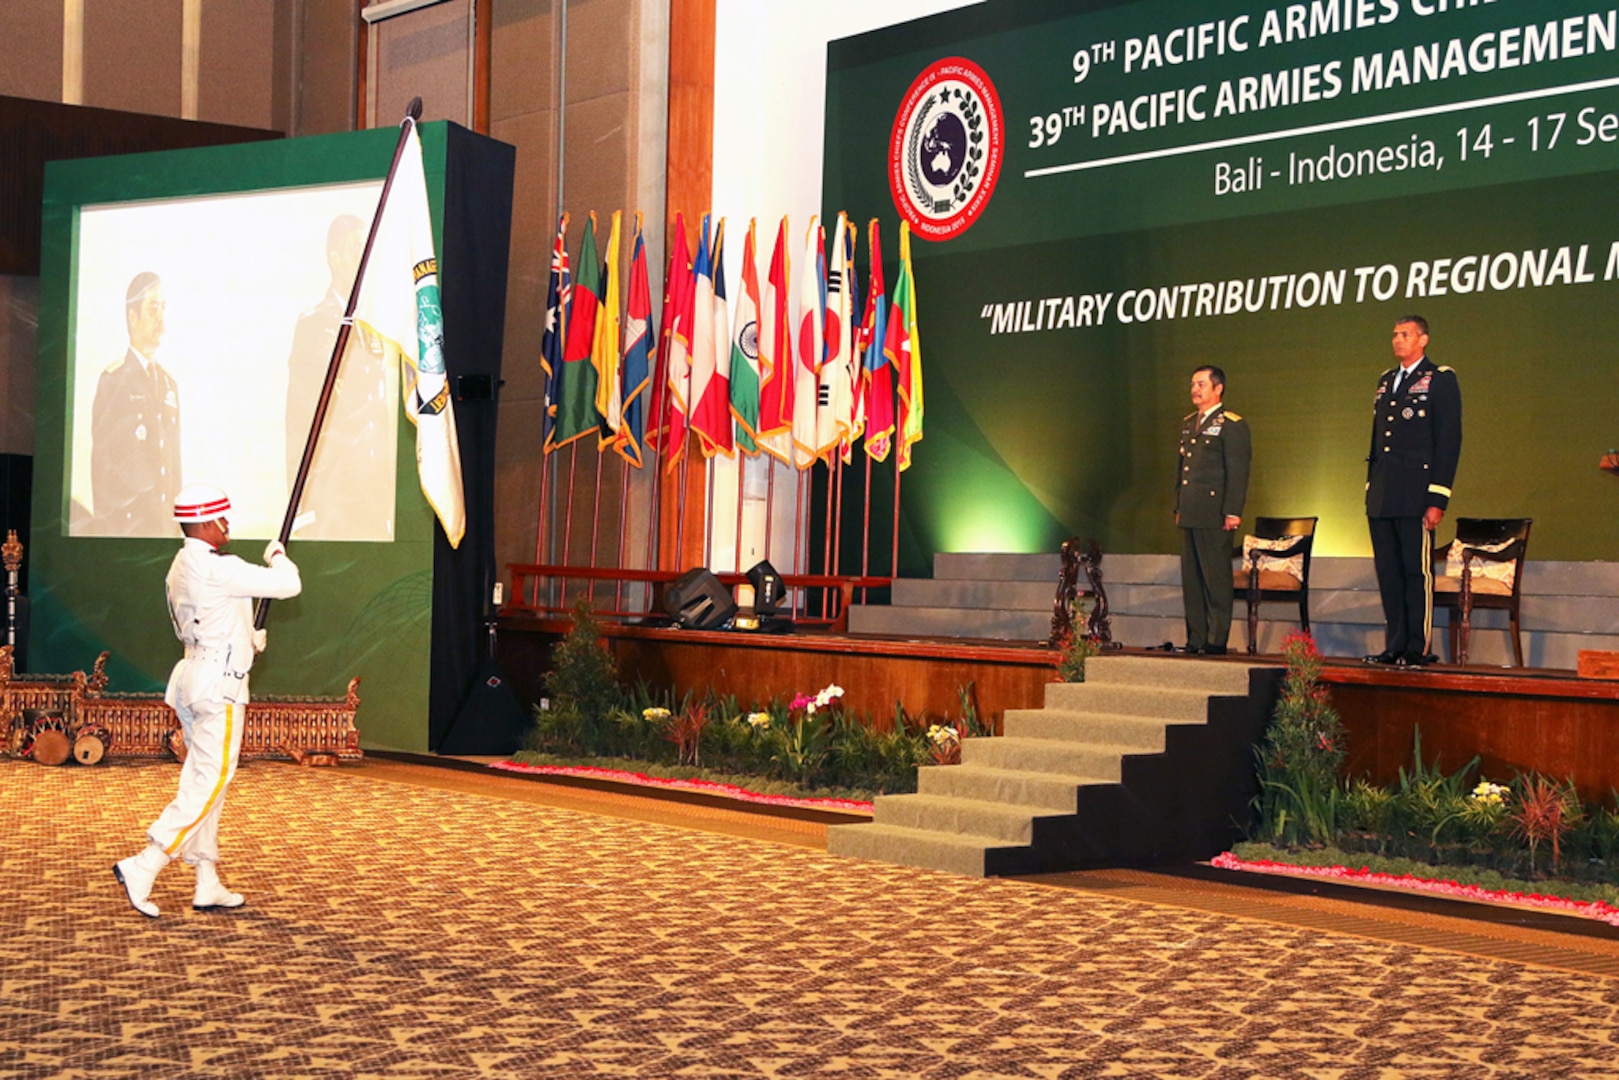 DENPASAR, Indonesia (Sept. 14, 2015) - Indonesia National Army color guard presented the Pacific Armies Chiefs Conference (PACC) & Pacific Armies Management Seminar (PAMS) flag to Lt. Gen. Erwin Syafitri, Indonesian Army Vice Chief of Staff, and Gen. Vincent K. Brooks, U.S. Army Pacific Commanding General, co-chairs for PAMS XXXIX, to signify the opening of the seminar,.